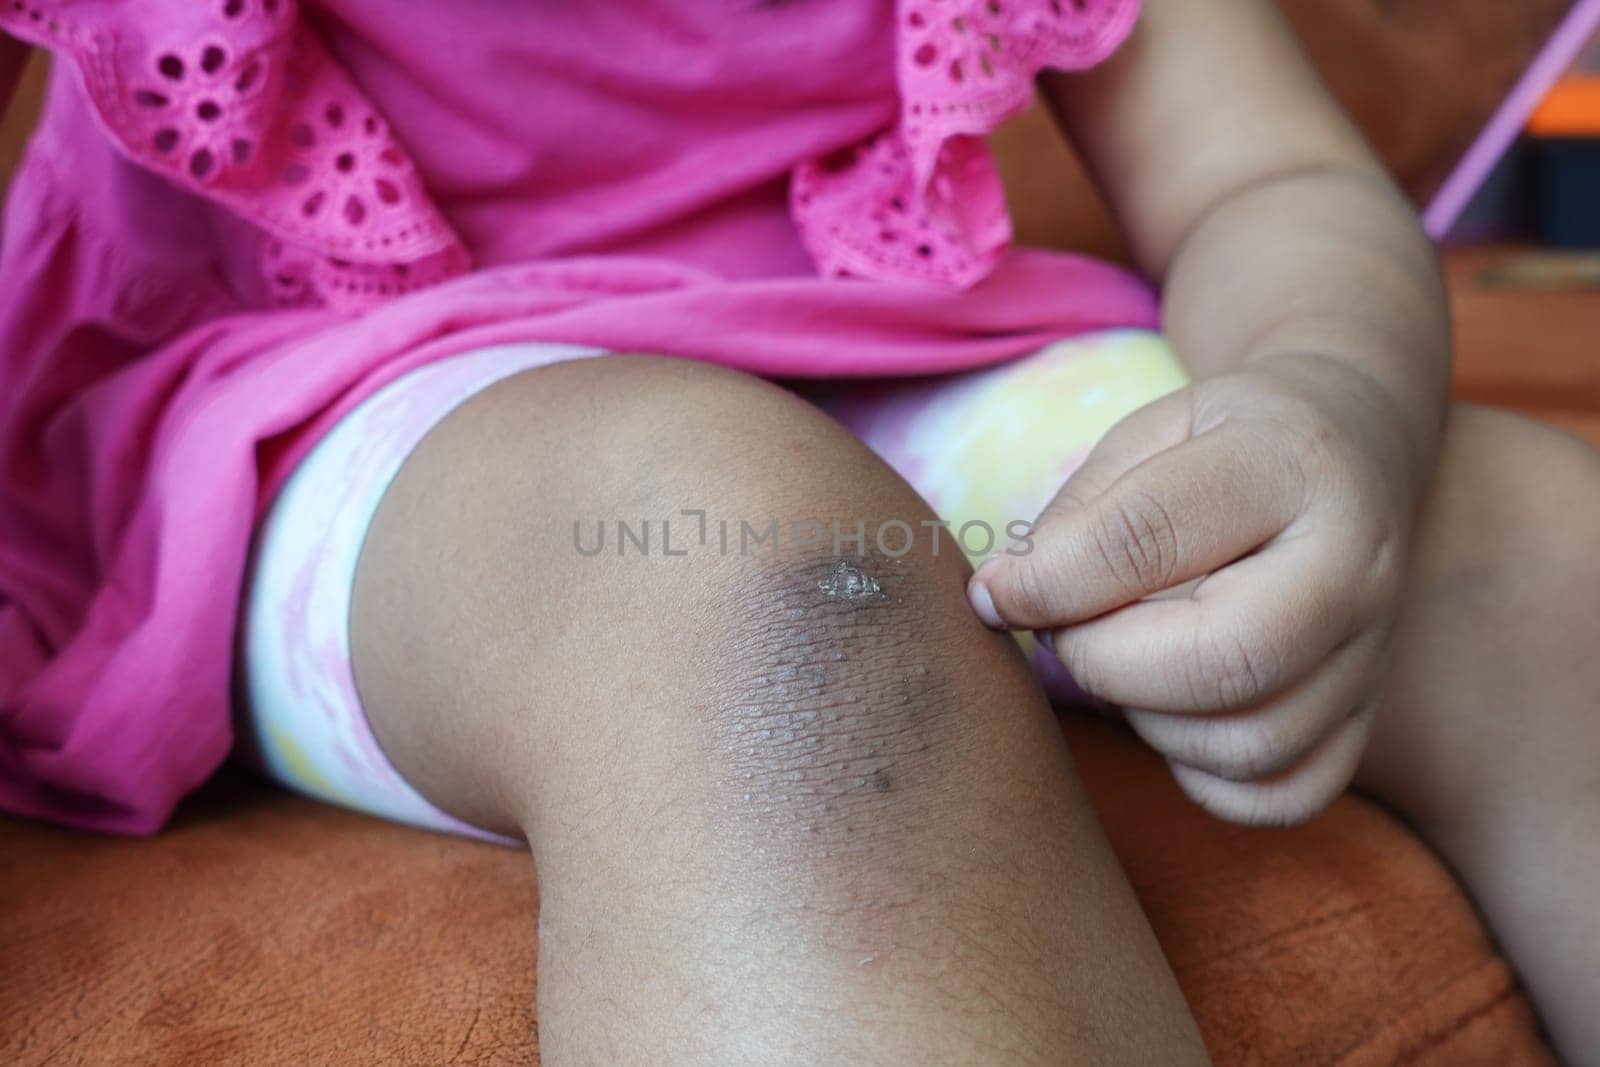 stain bruise wound on child knee. by towfiq007